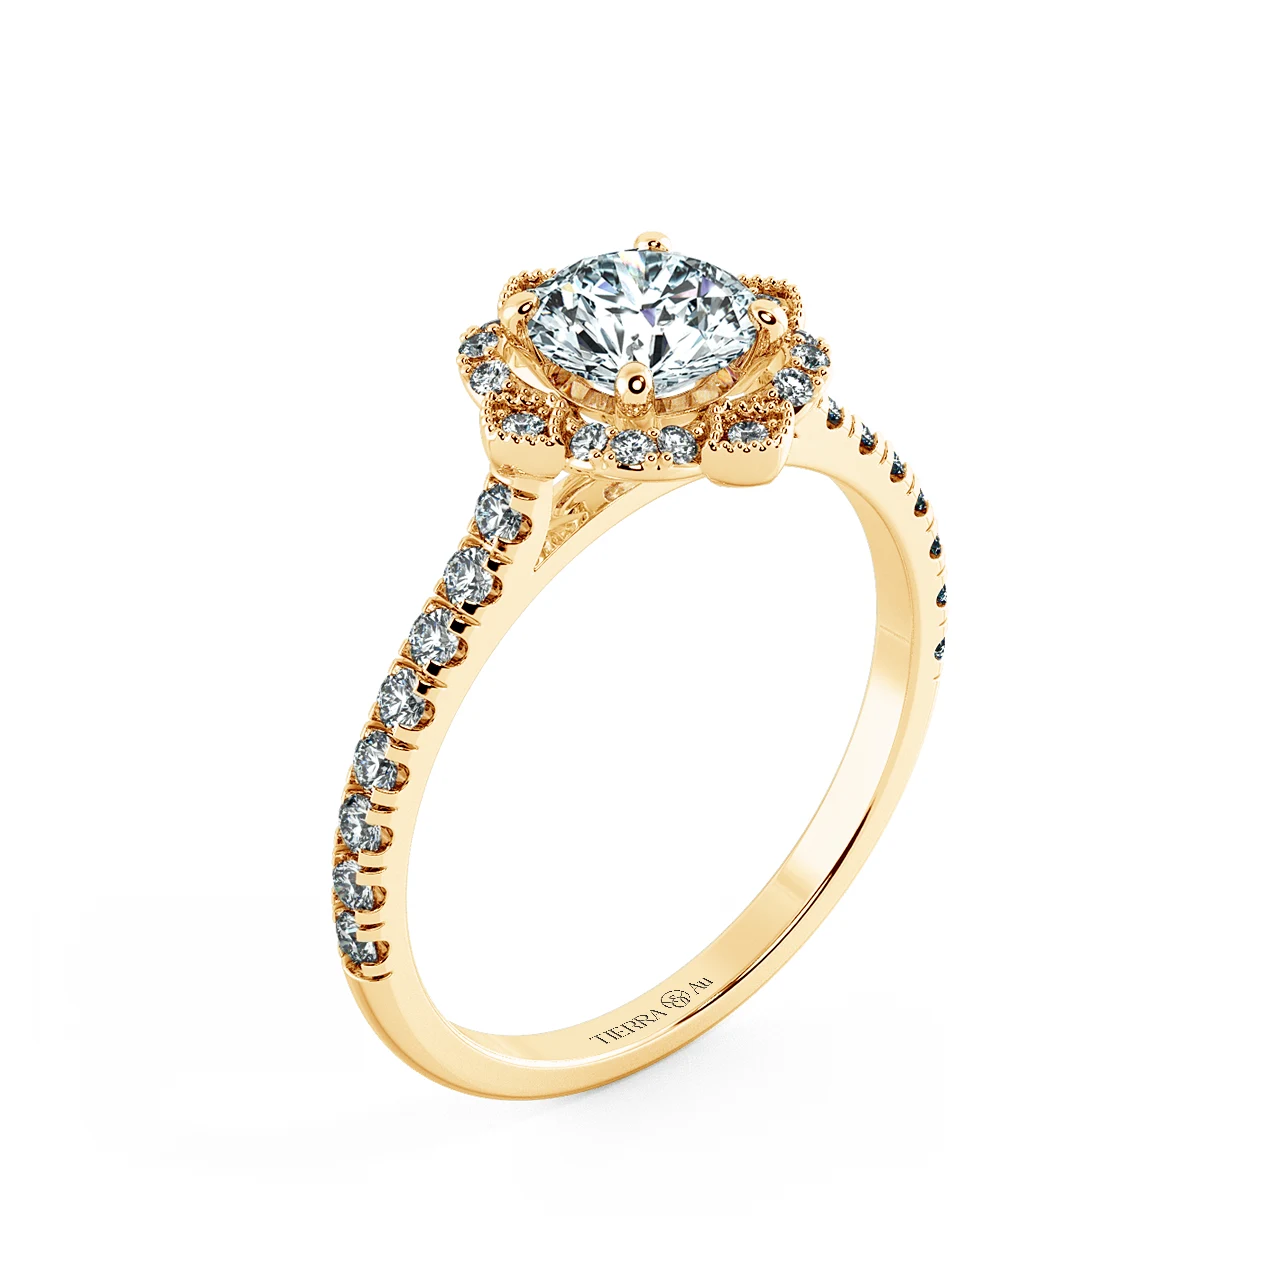 Halo Floral Engagement Ring with Eternity Band NCH2402 4